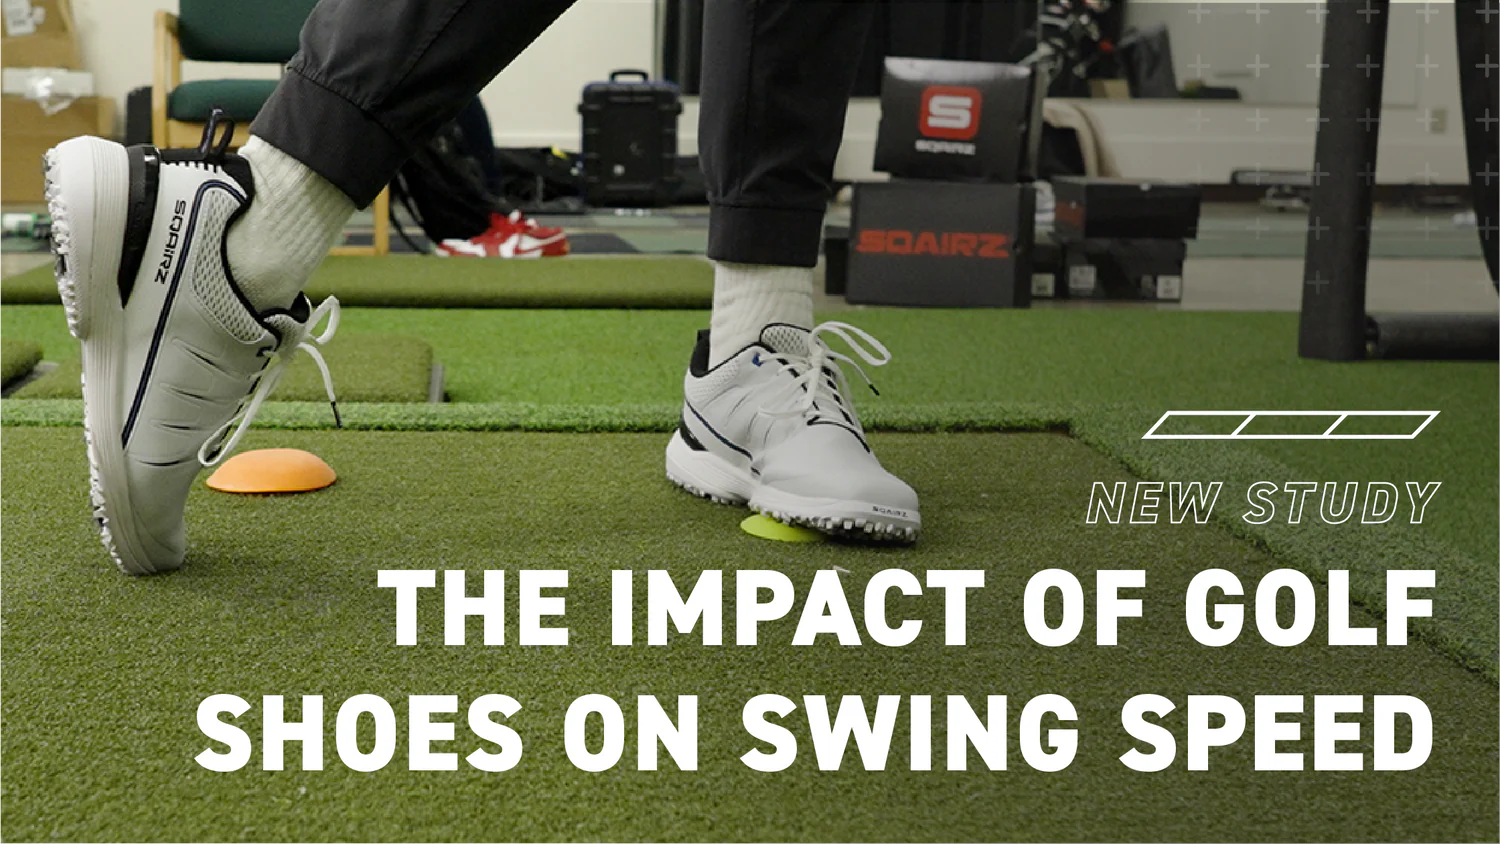 Groundbreaking Clinical Study Results: The Impact of Golf Shoes on Swing Speed